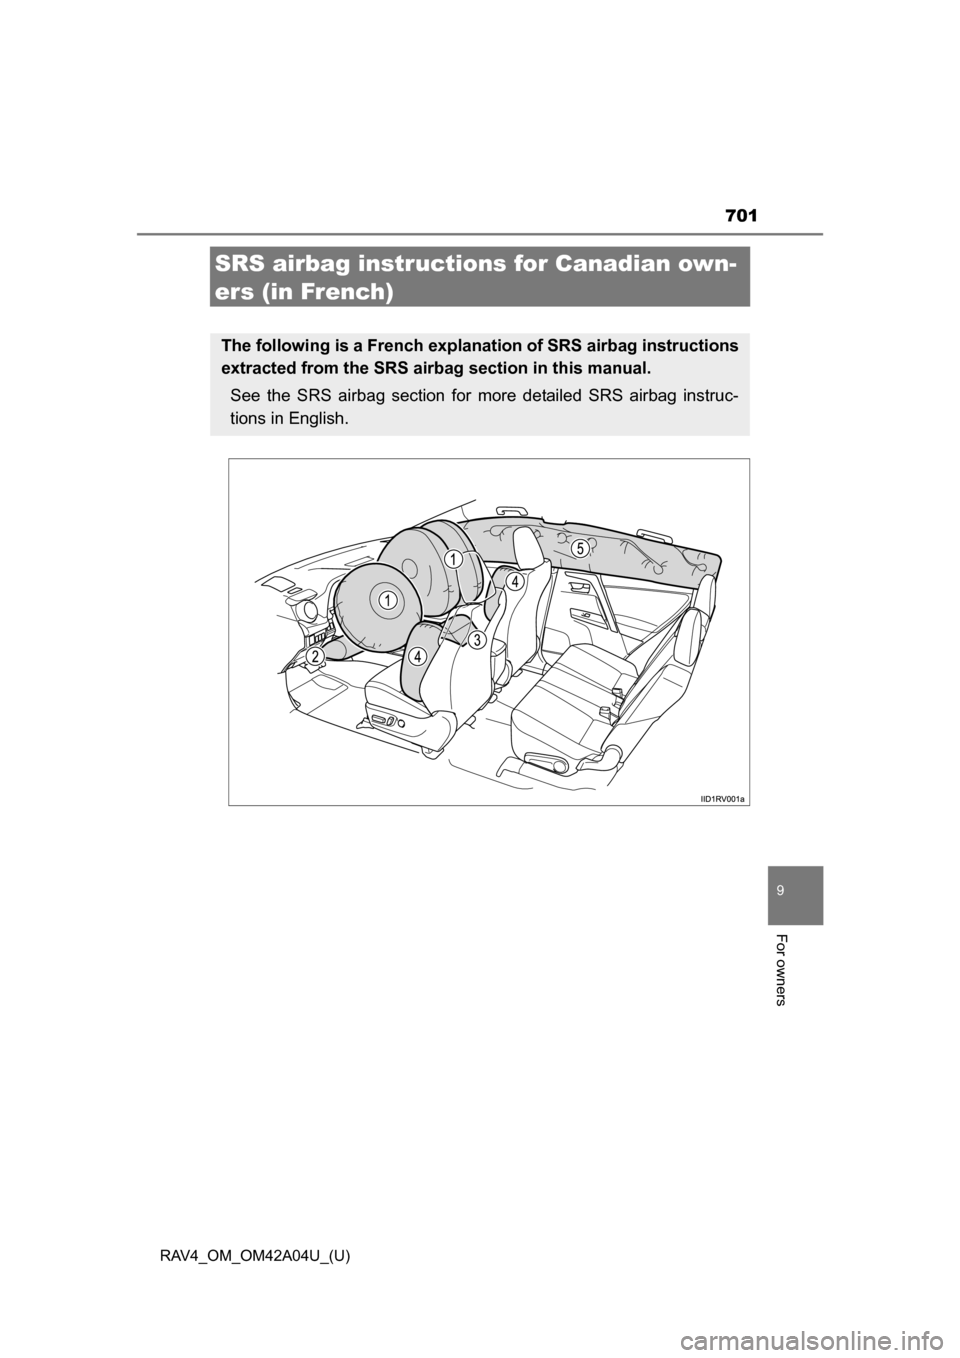 TOYOTA RAV4 2014 XA40 / 4.G Owners Guide 701
RAV4_OM_OM42A04U_(U)
9
For owners
SRS airbag instructions for Canadian own-
ers (in French)
The following is a French explanation of SRS airbag instructions
extracted from the SRS airbag section i